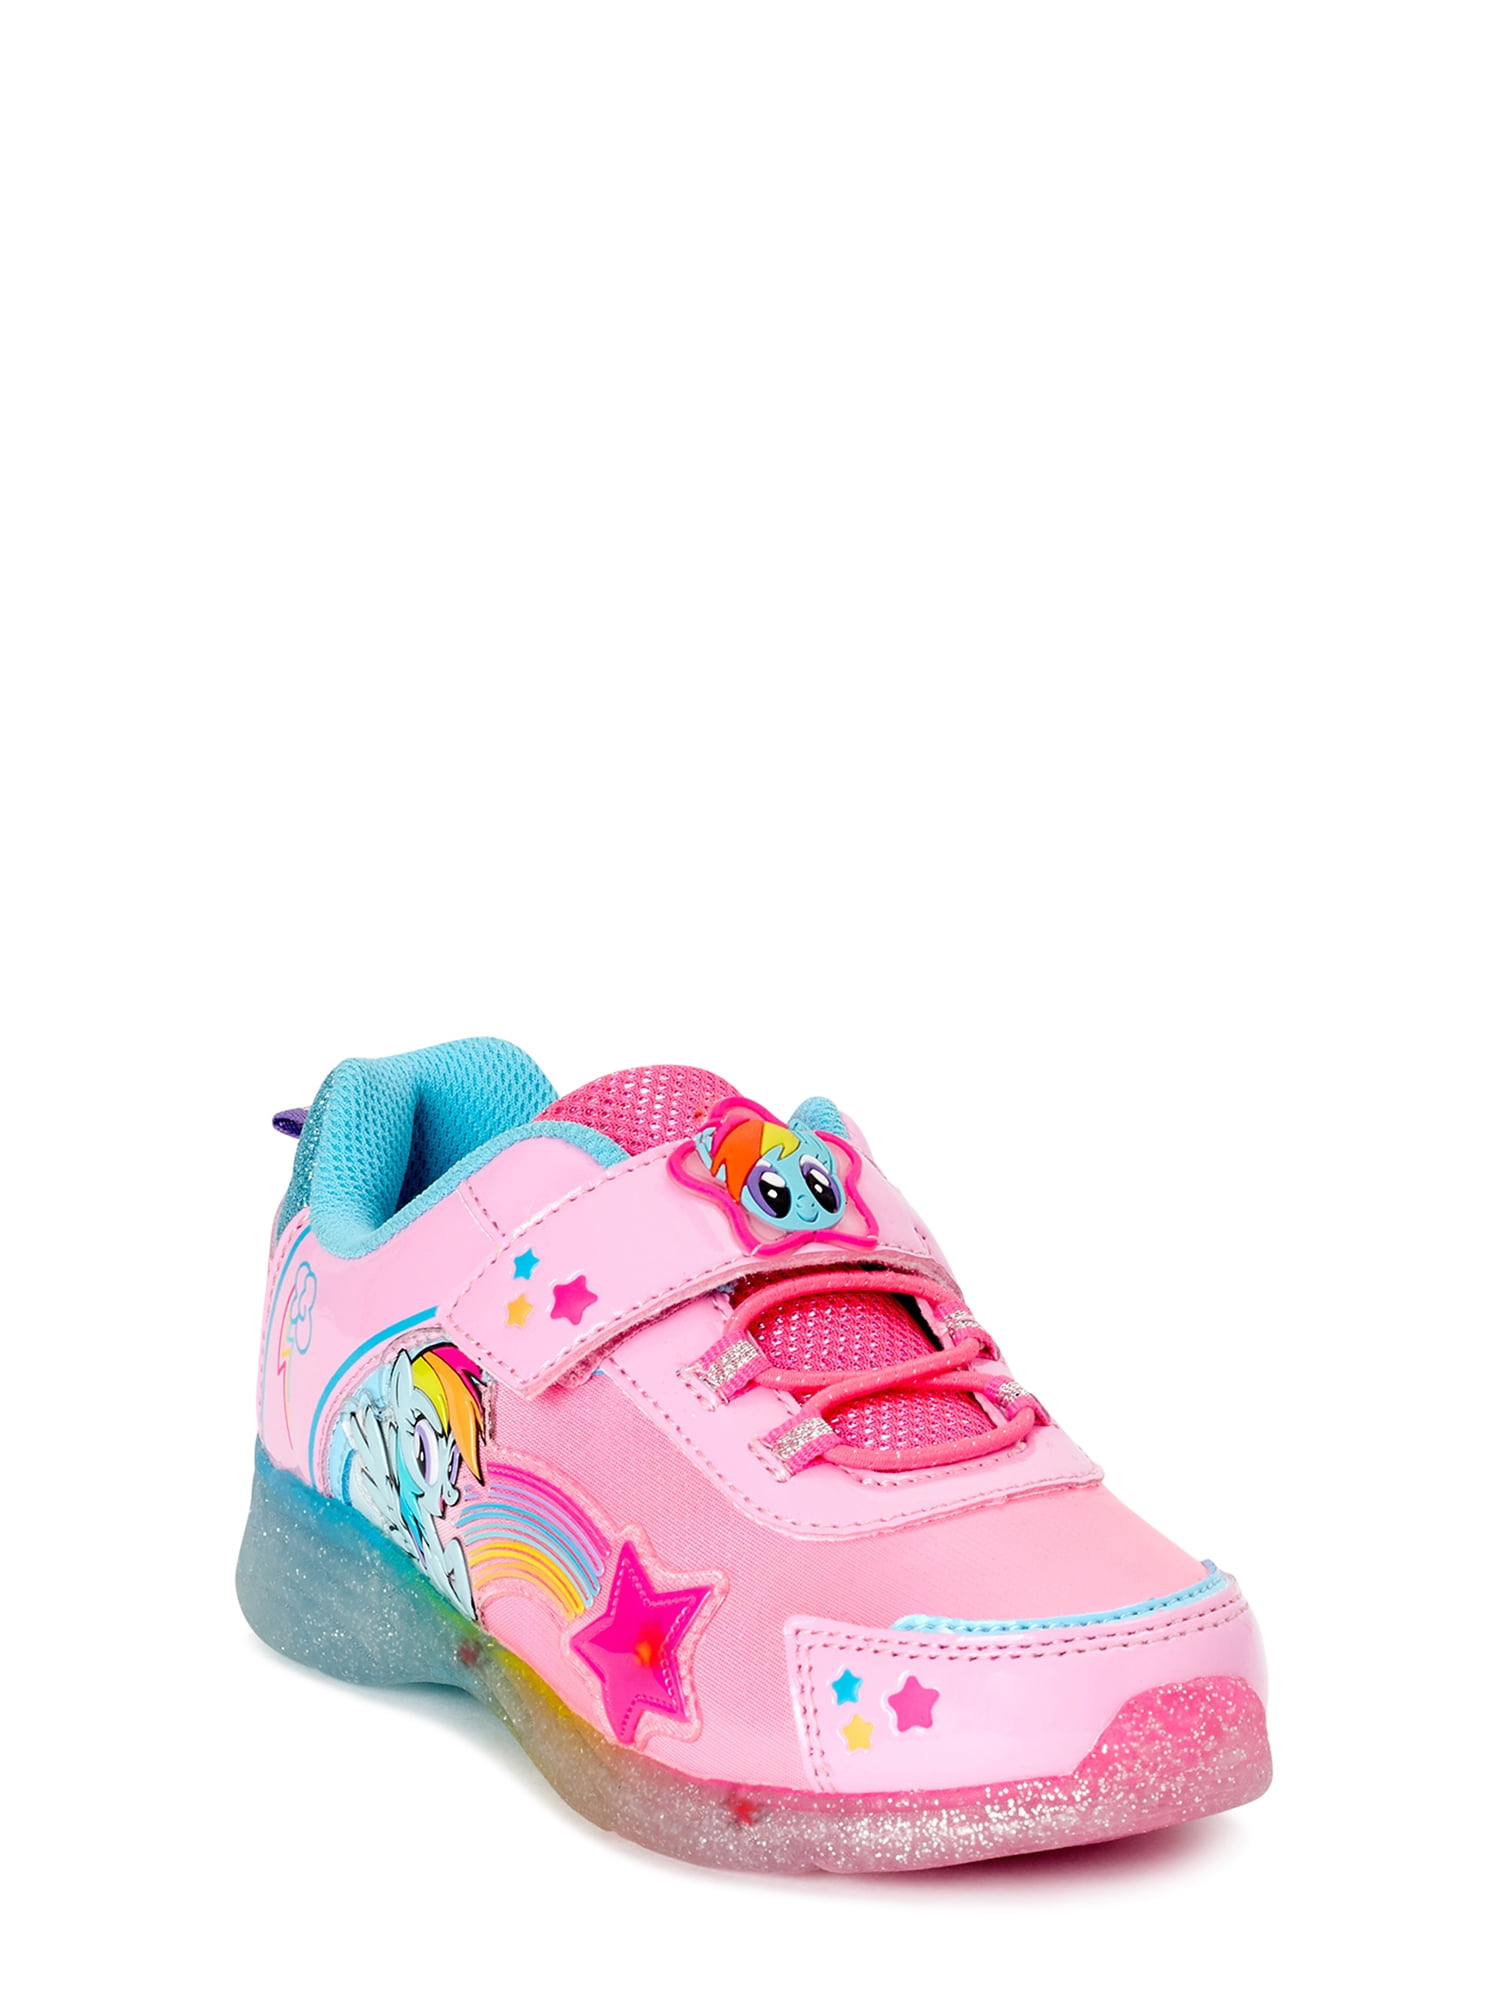 my little pony shoes size 13